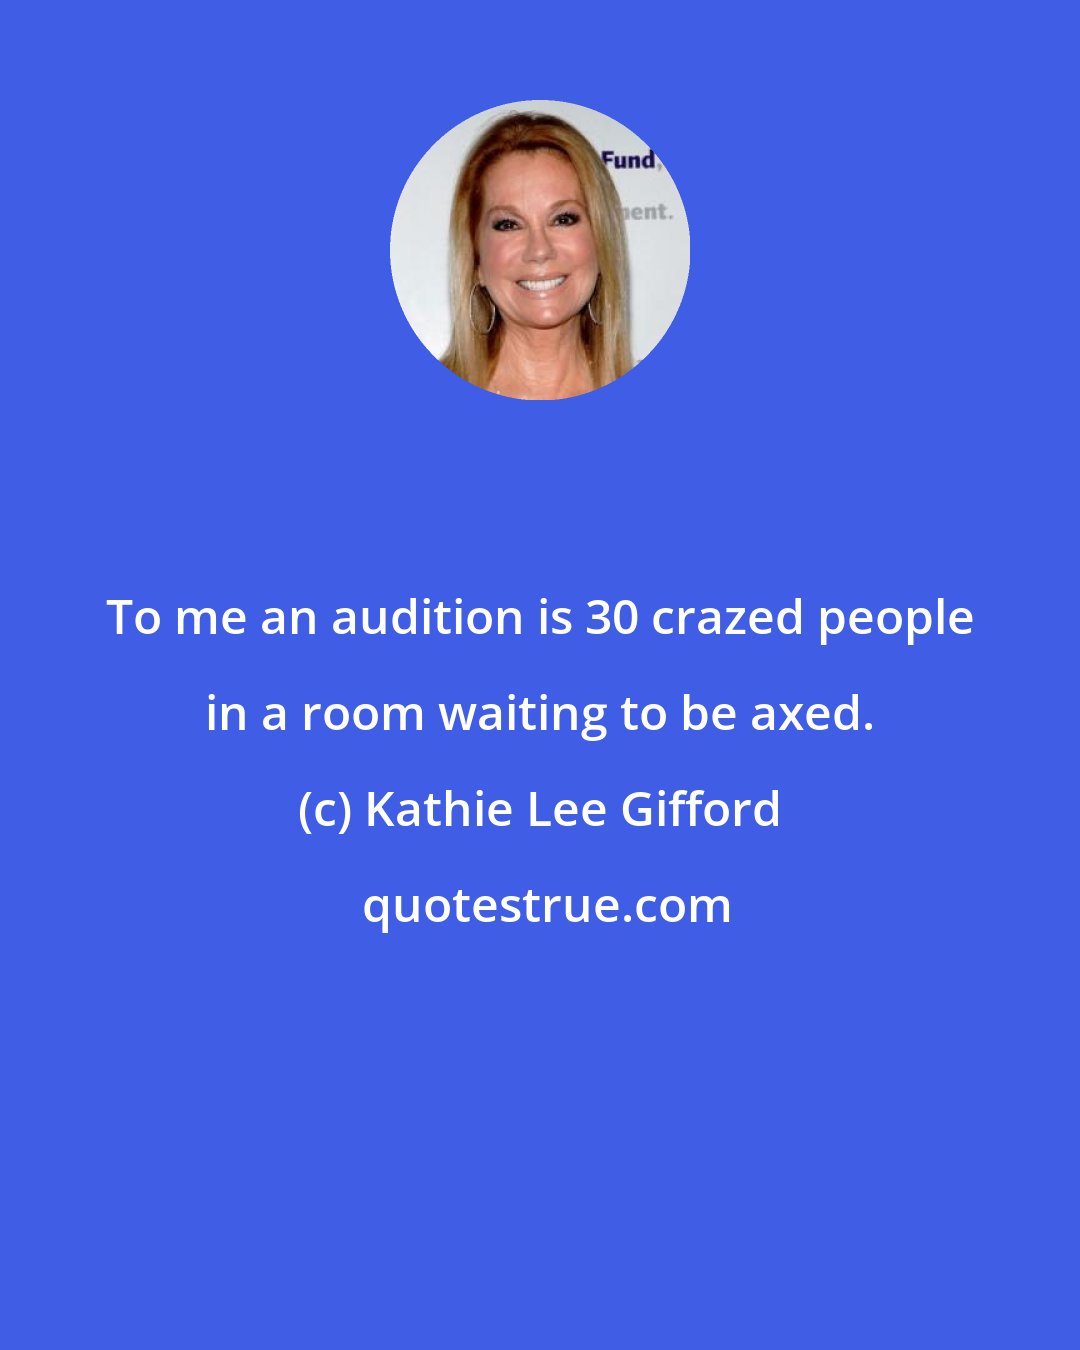 Kathie Lee Gifford: To me an audition is 30 crazed people in a room waiting to be axed.